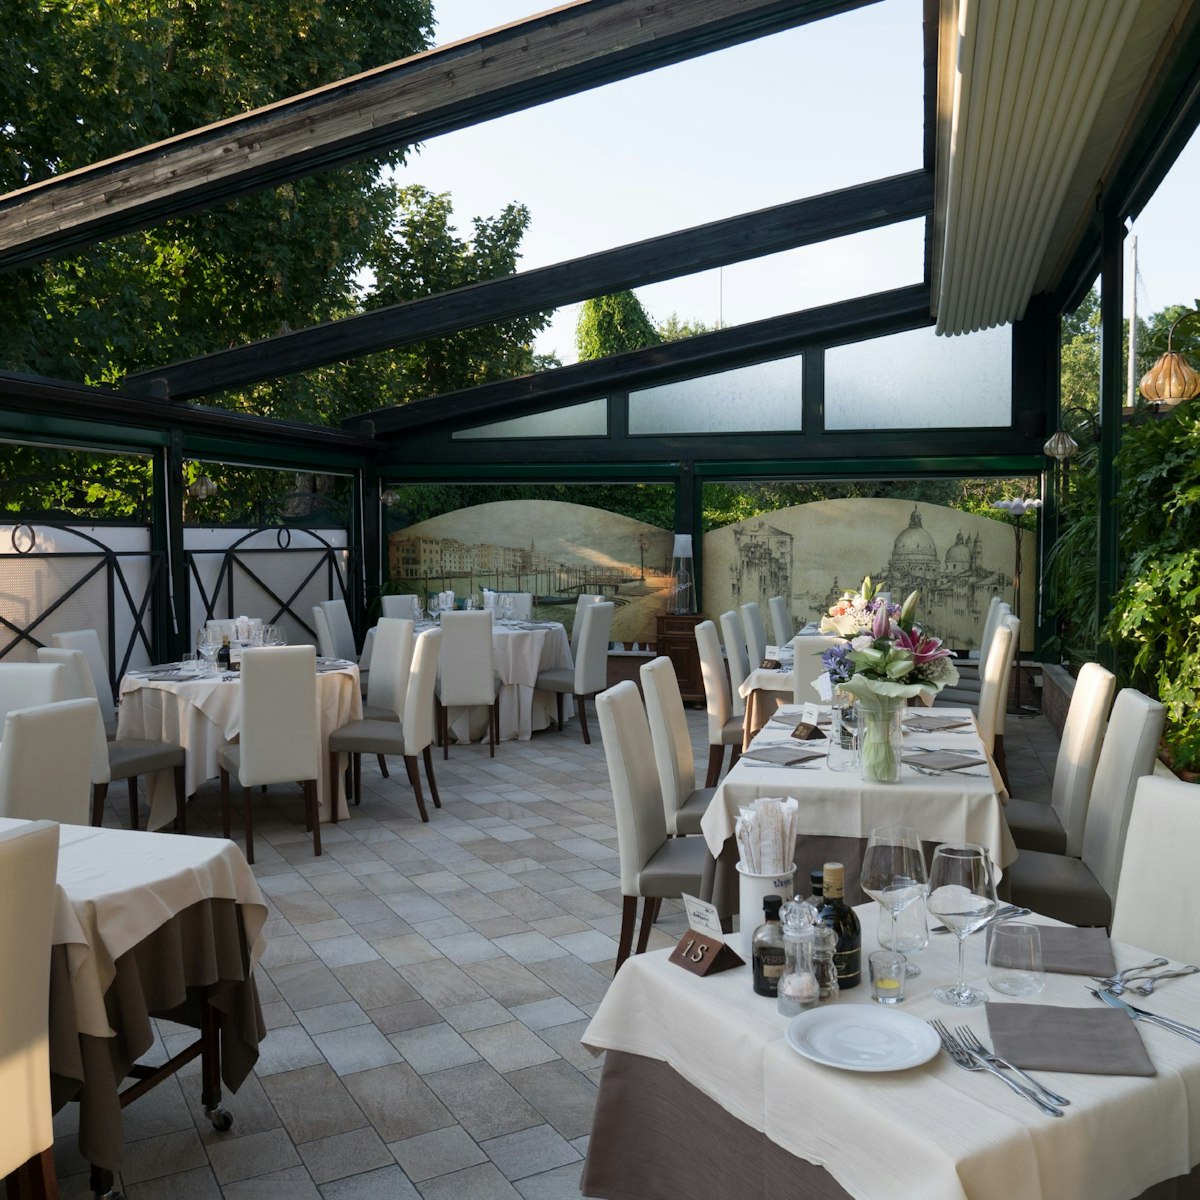 In summer months, alfresco dining takes place in the pretty garden at La Favorita